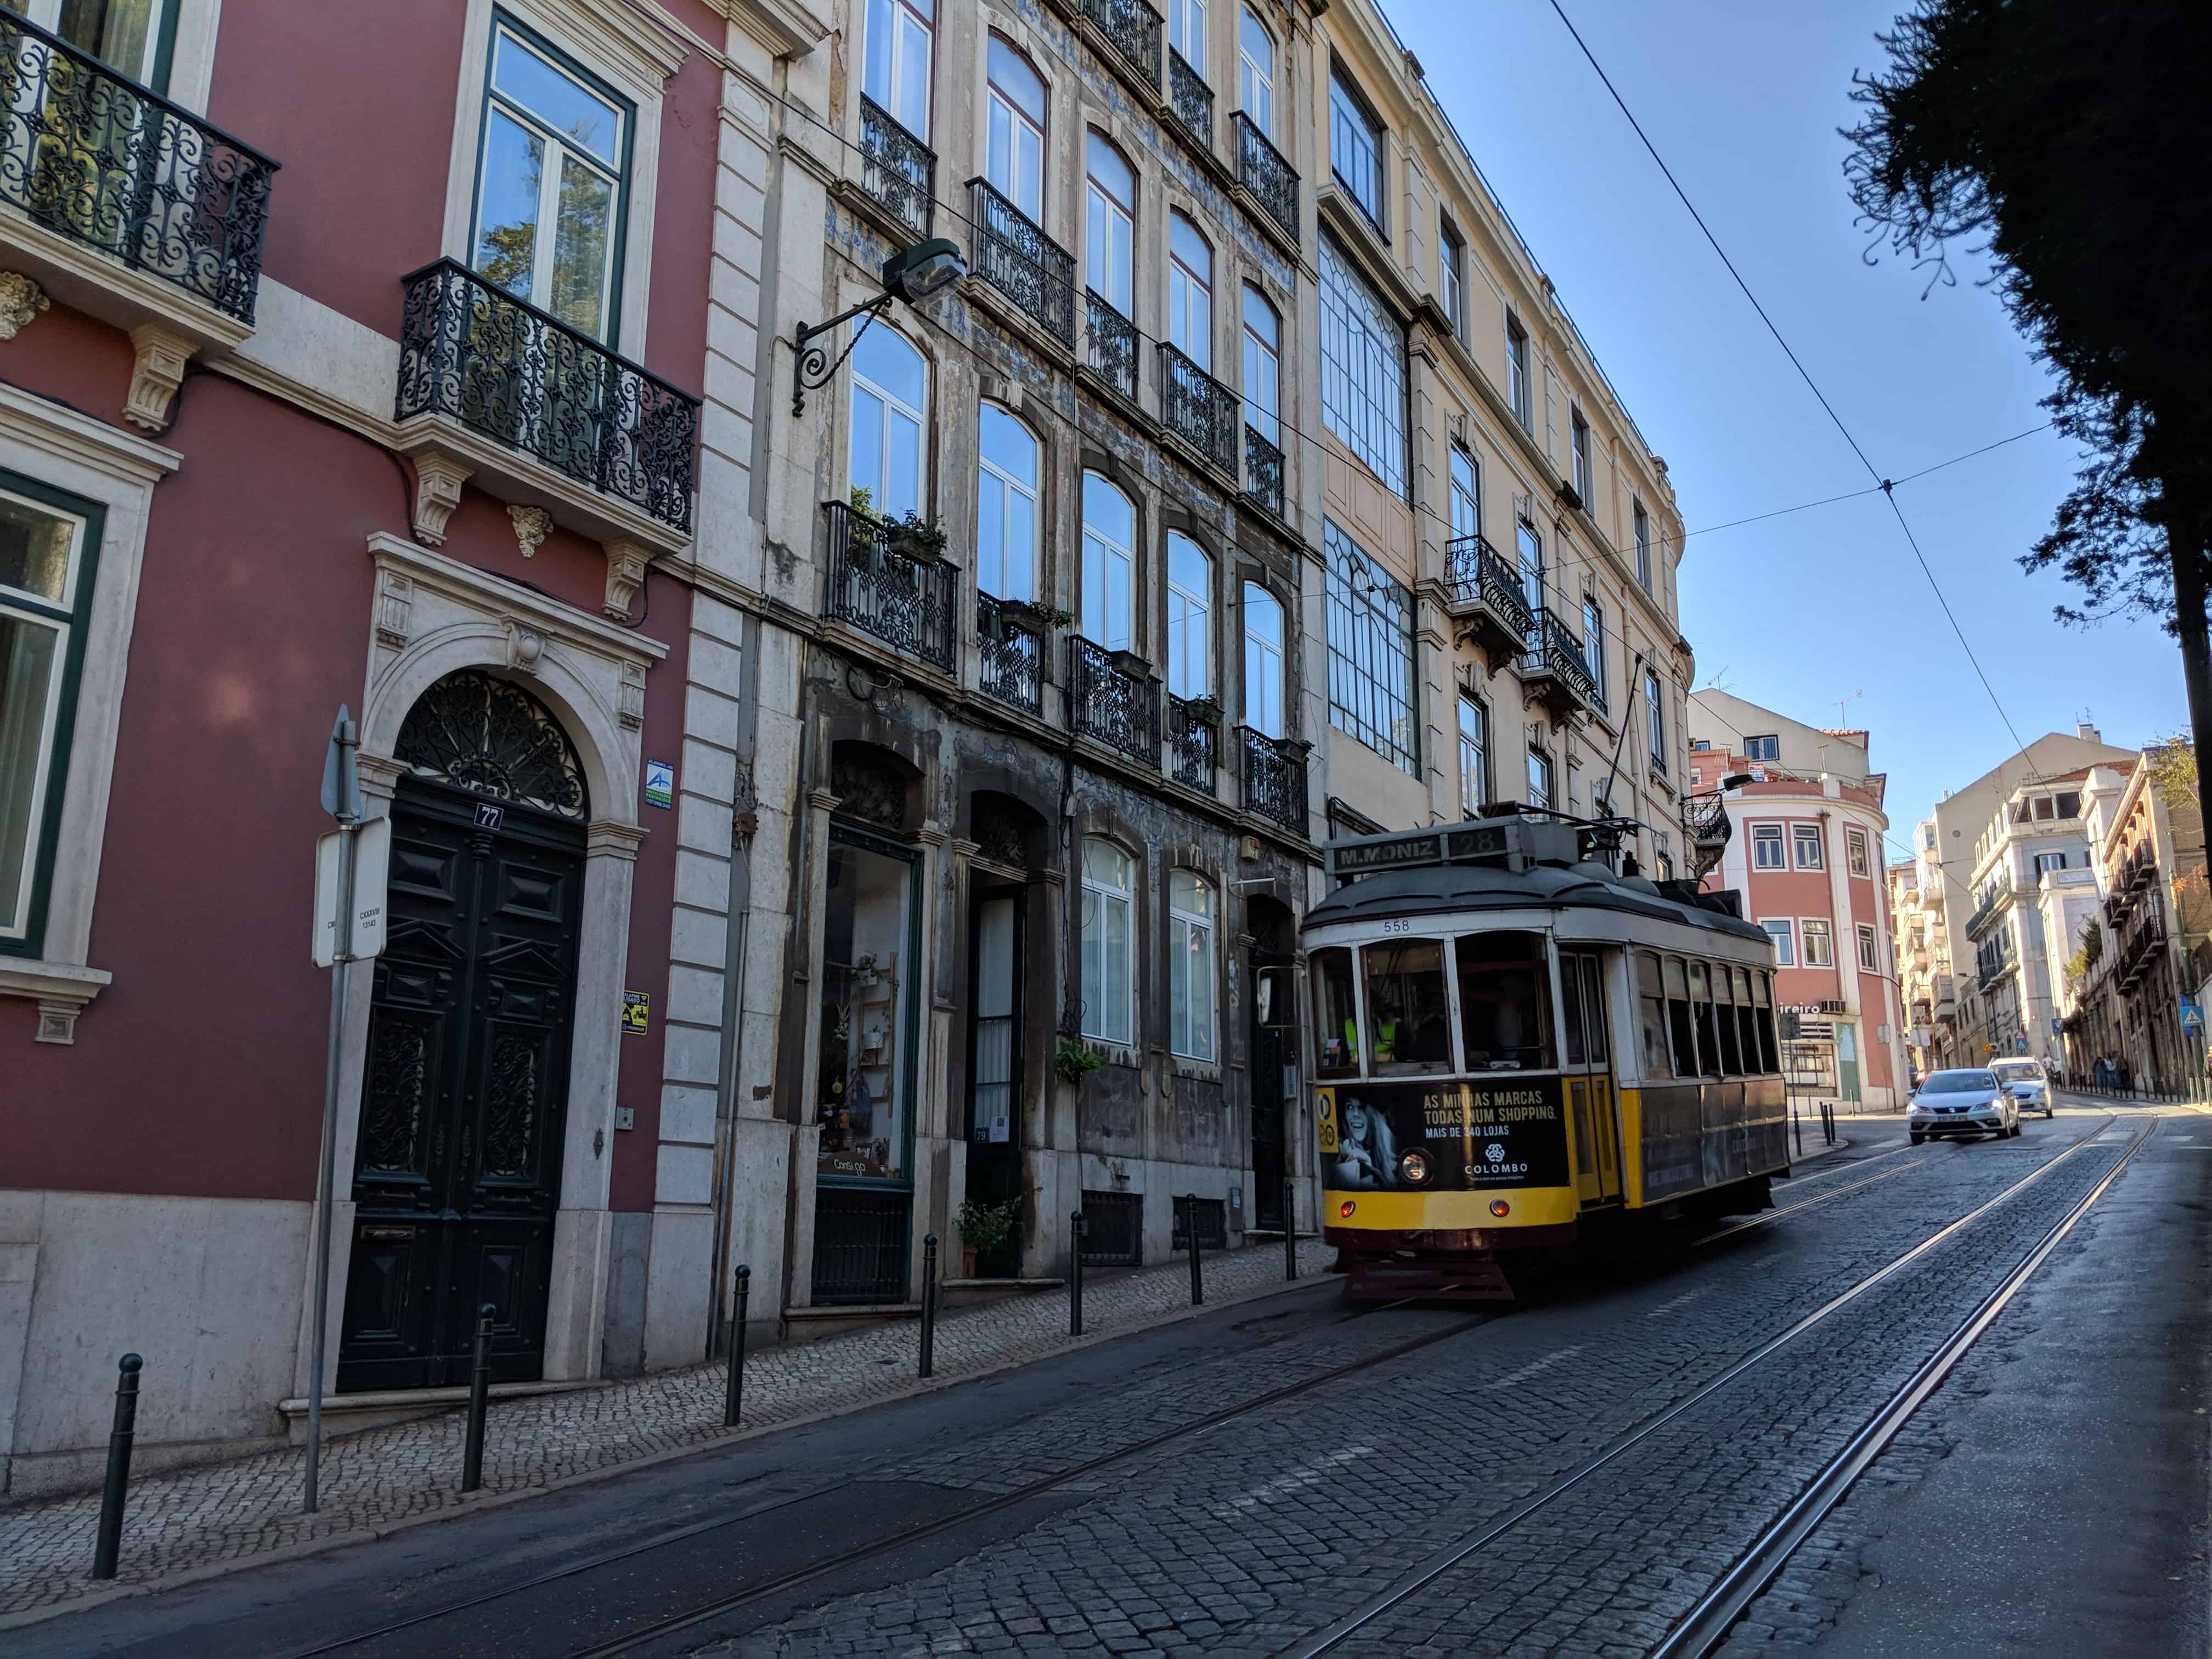 Trans driving down a cobbled city street